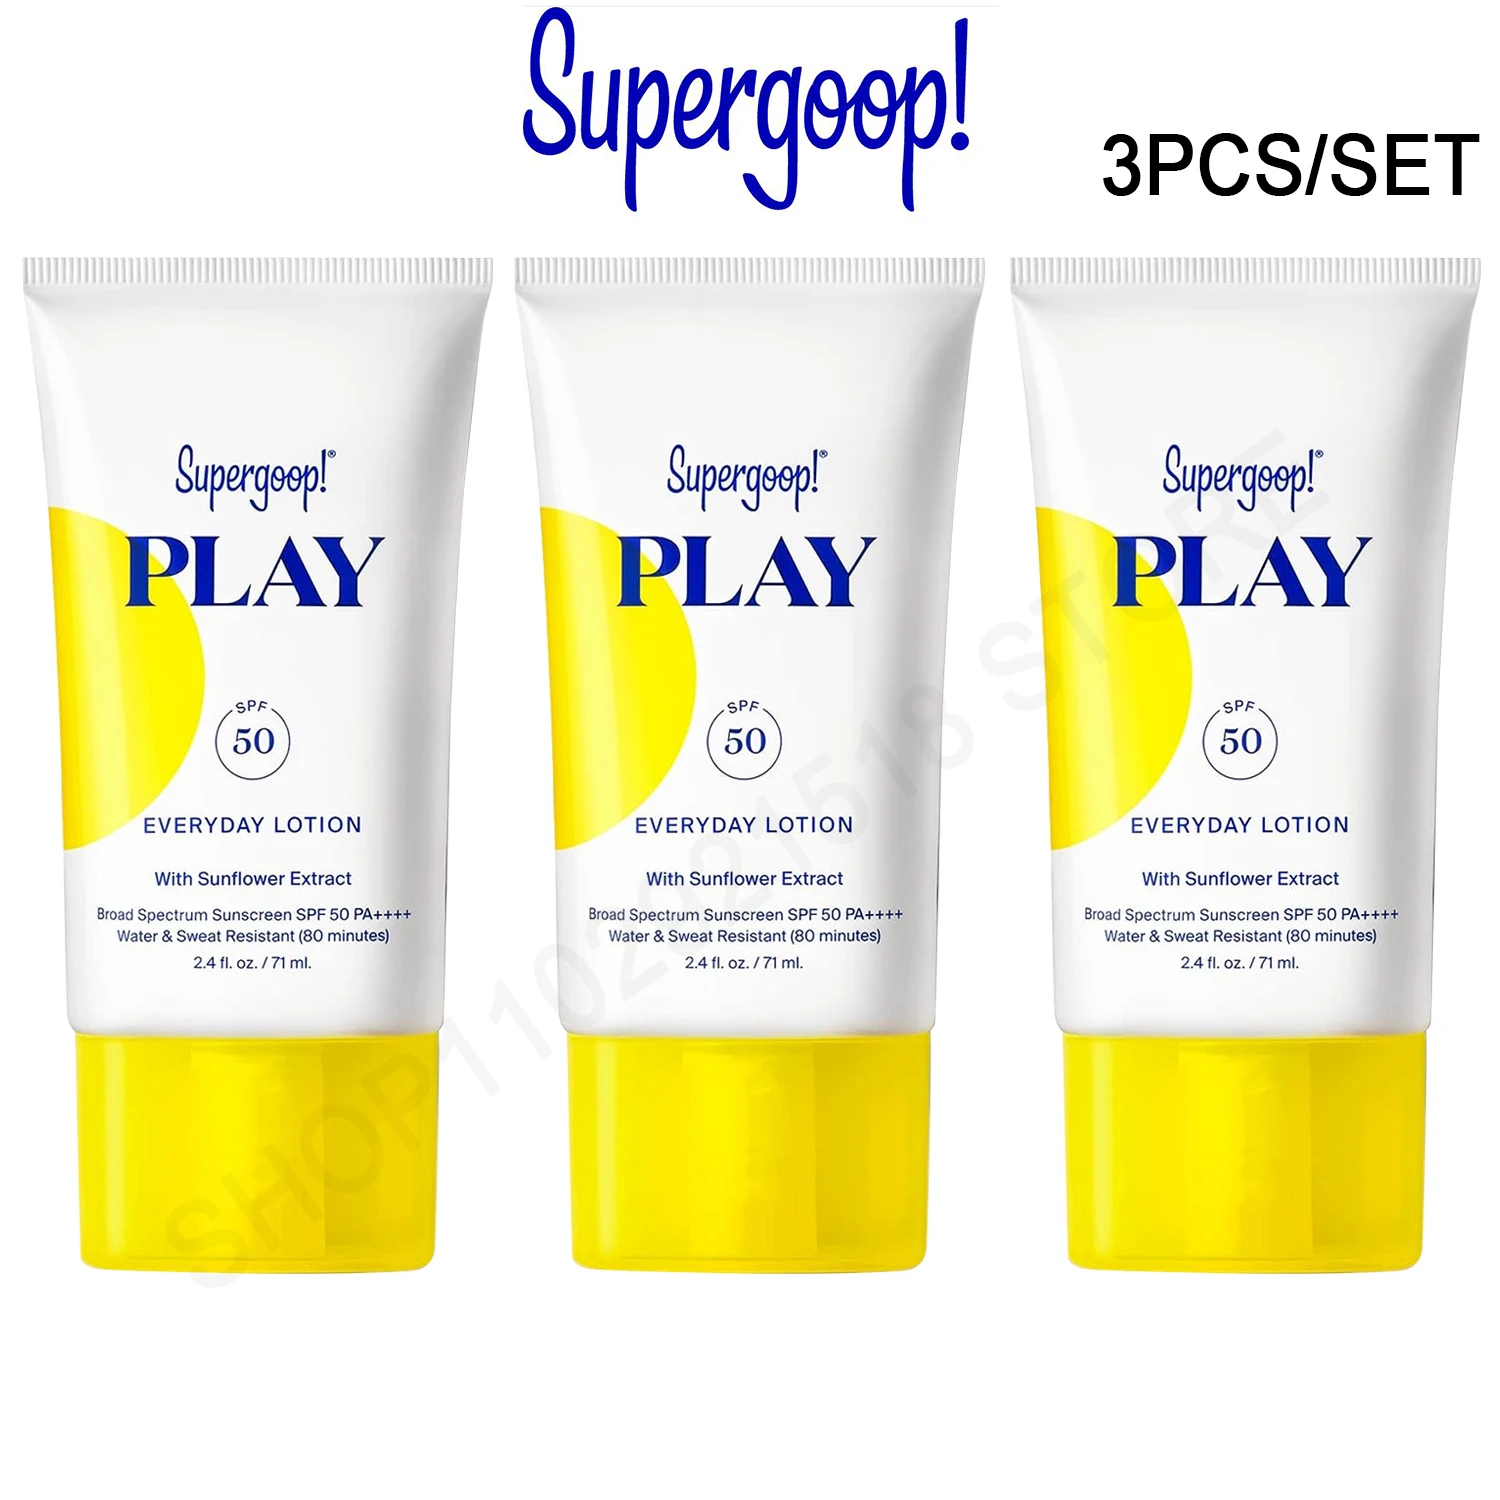 

3PCS Supergoop PLAY Everyday Lotion SPF 50 Broad Spectrum Body & Face Sunscreen for Sensitive Skin Active Days Skin care 71ml